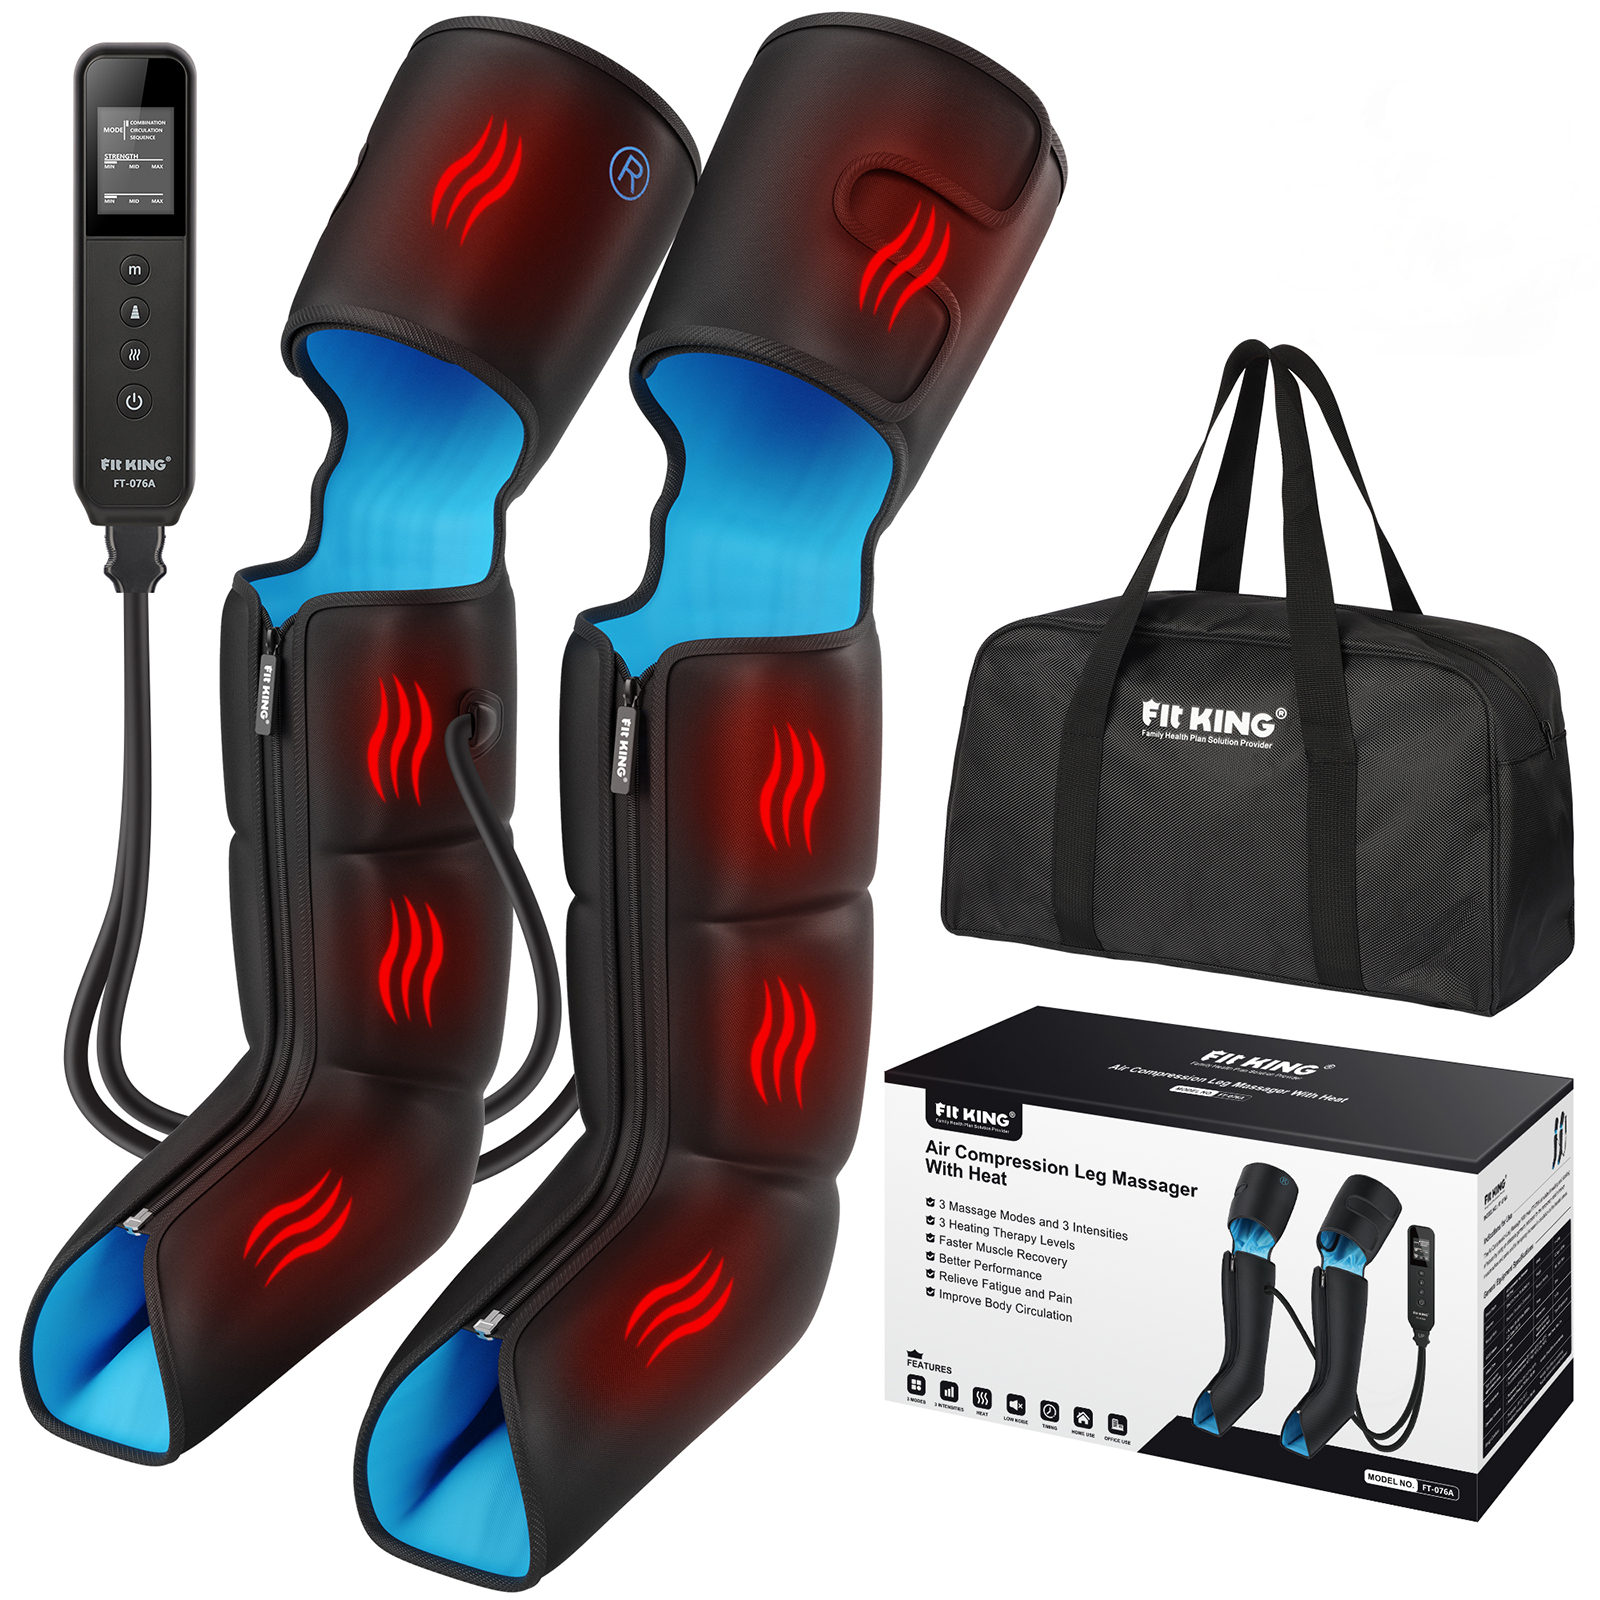 Full Leg and Foot Massager with Heat FT-076A